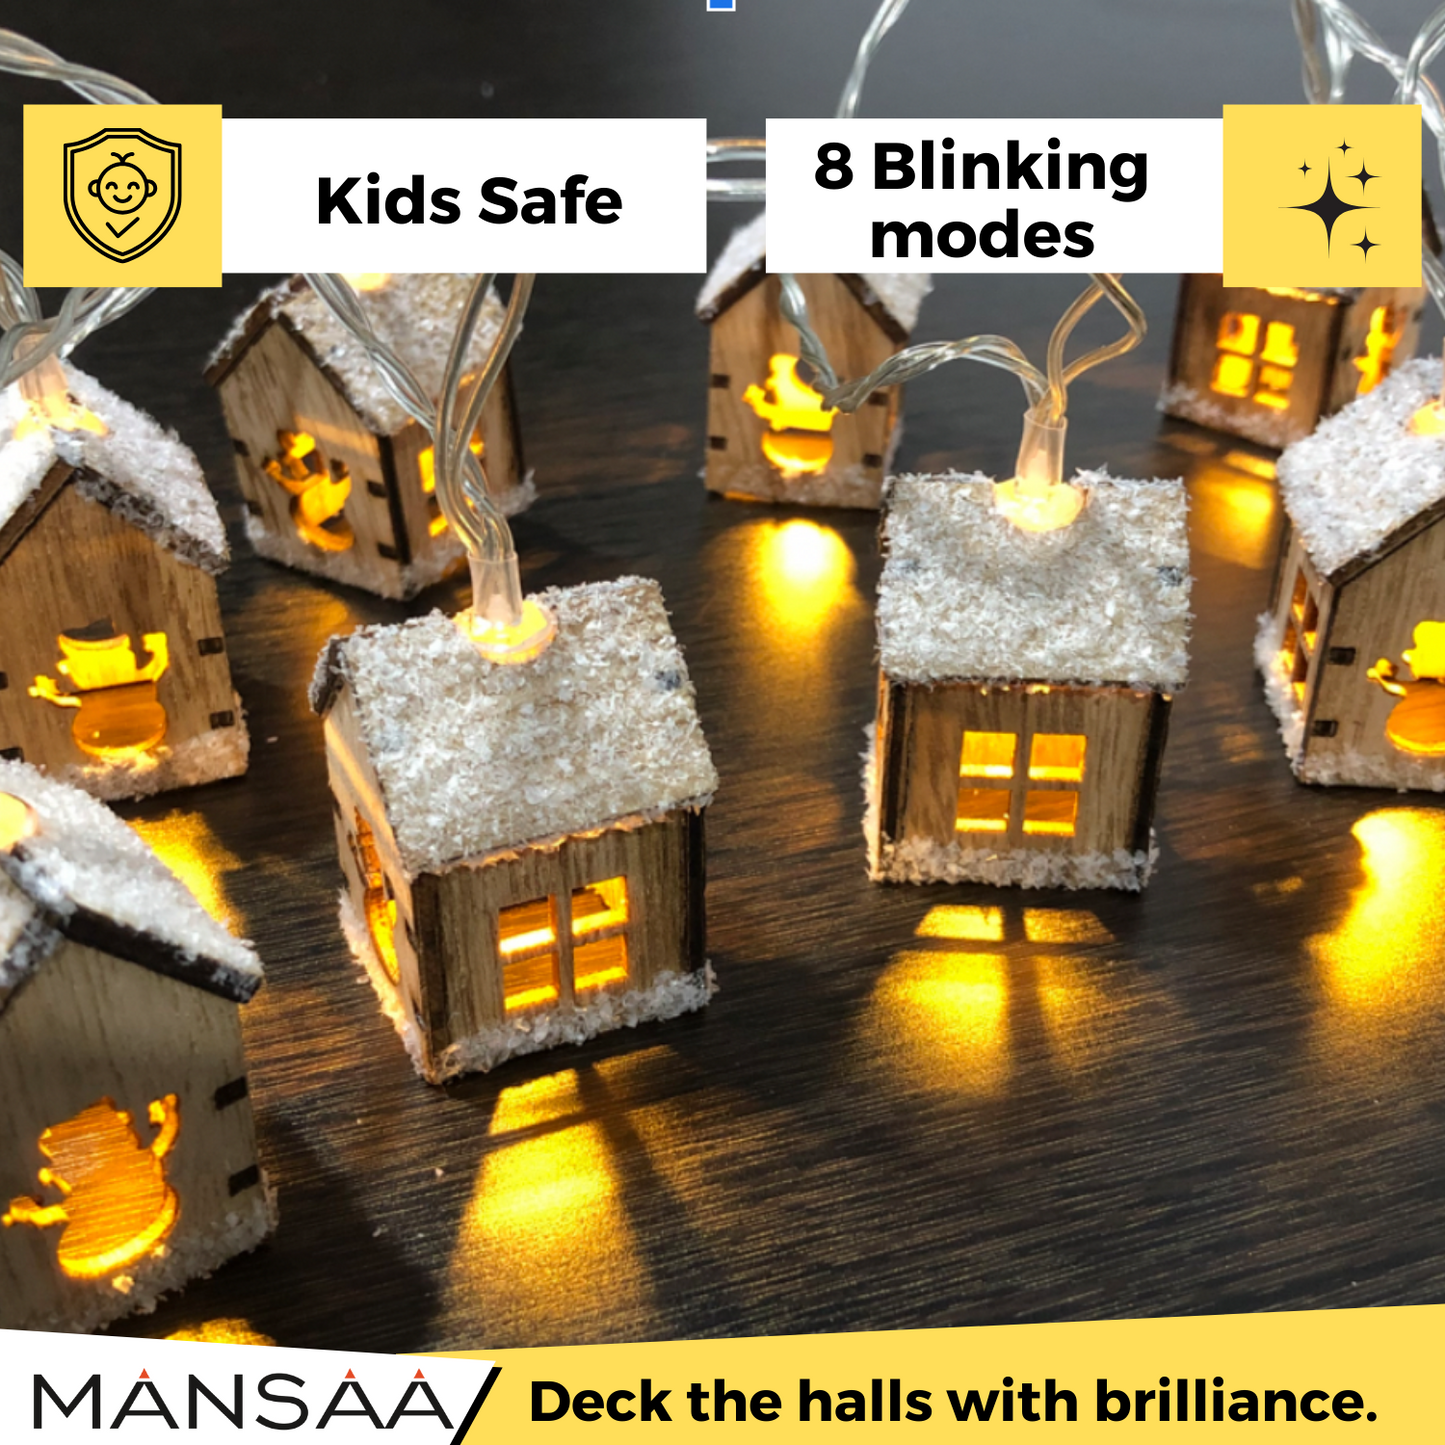 Wooden House with unique snow Christmas Lights, 2 Meter Direct Plug Christmas Light String | DIY Christmas Decor |8 Blinking Mode | Indoor Outdoor Party Bedroom Home Decor | Warm White